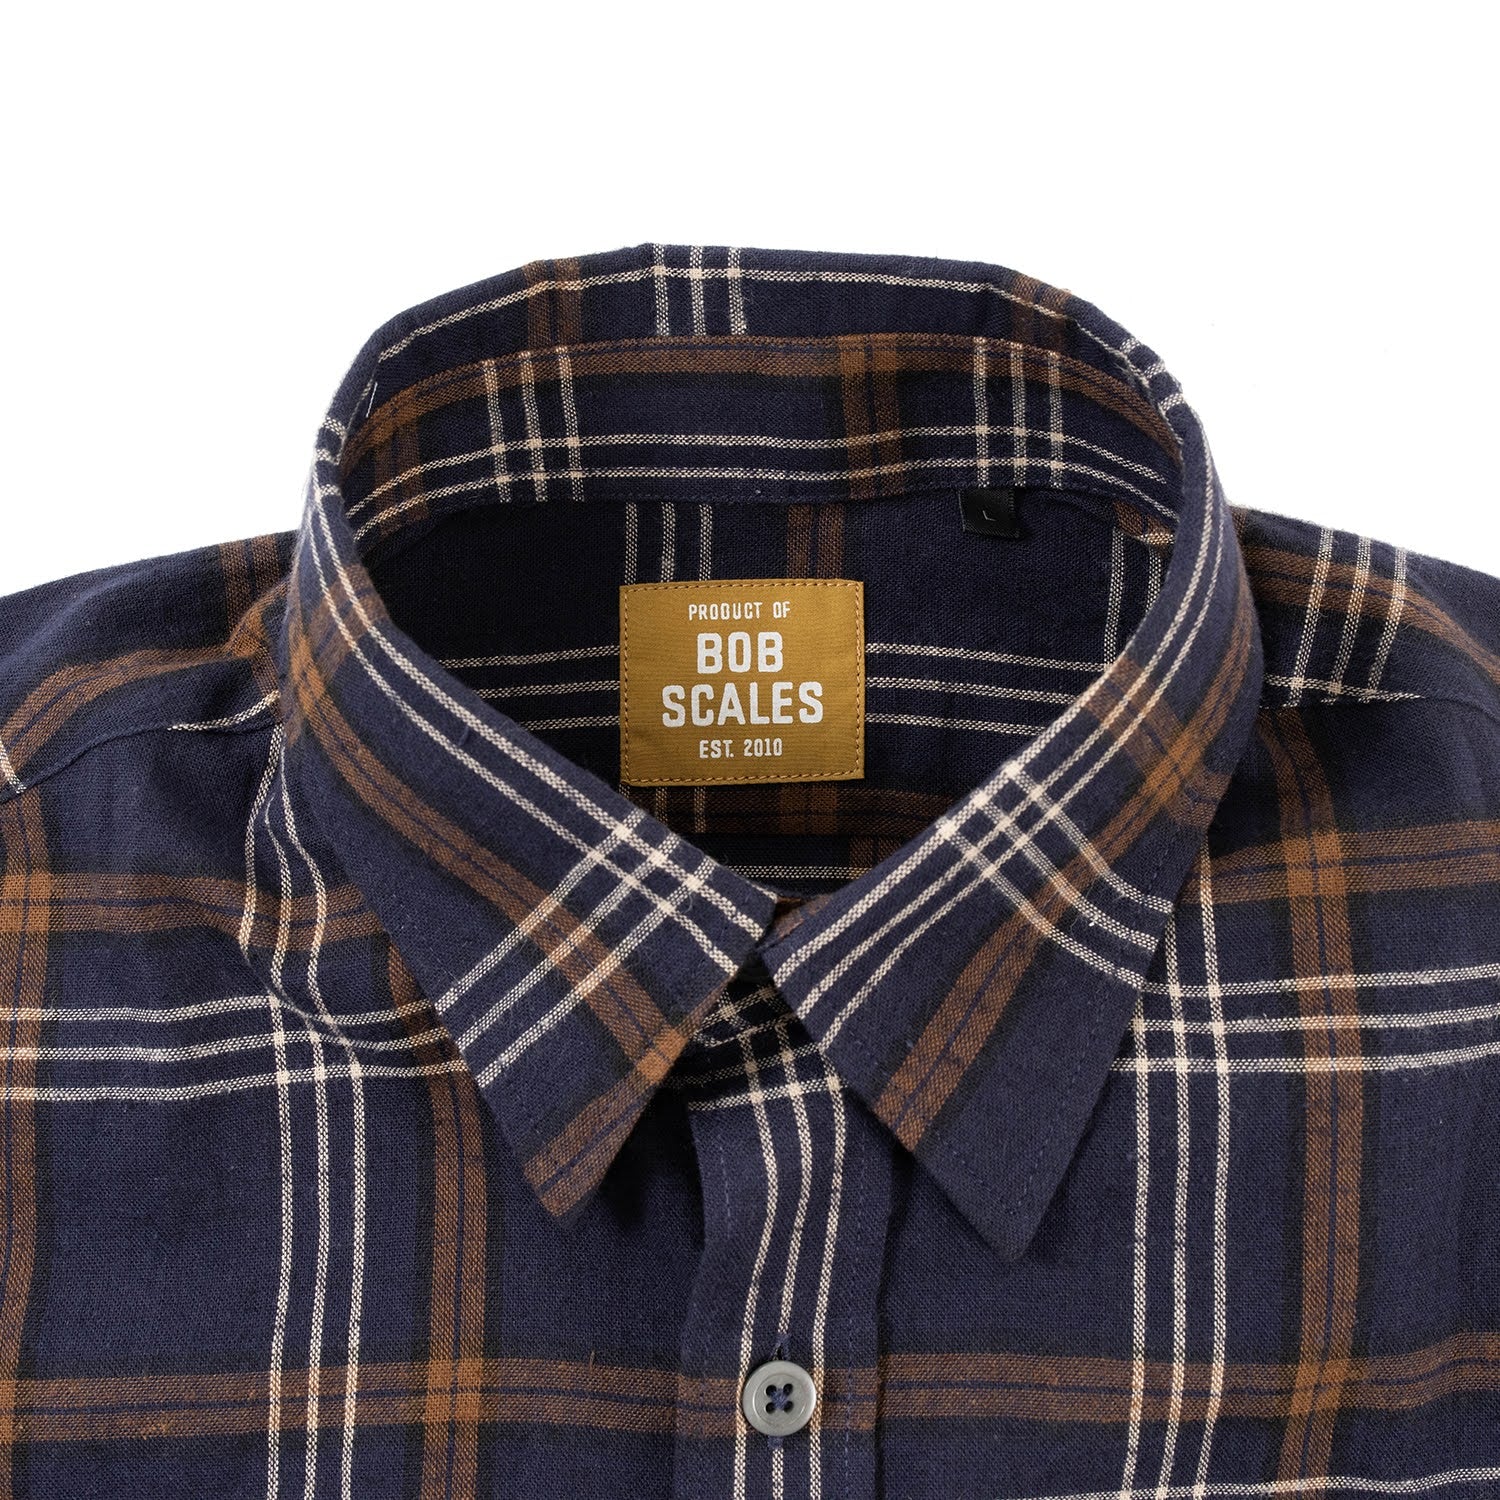 PRODUCT OF BOB SCALES Linen Short Sleeve Daily Driver